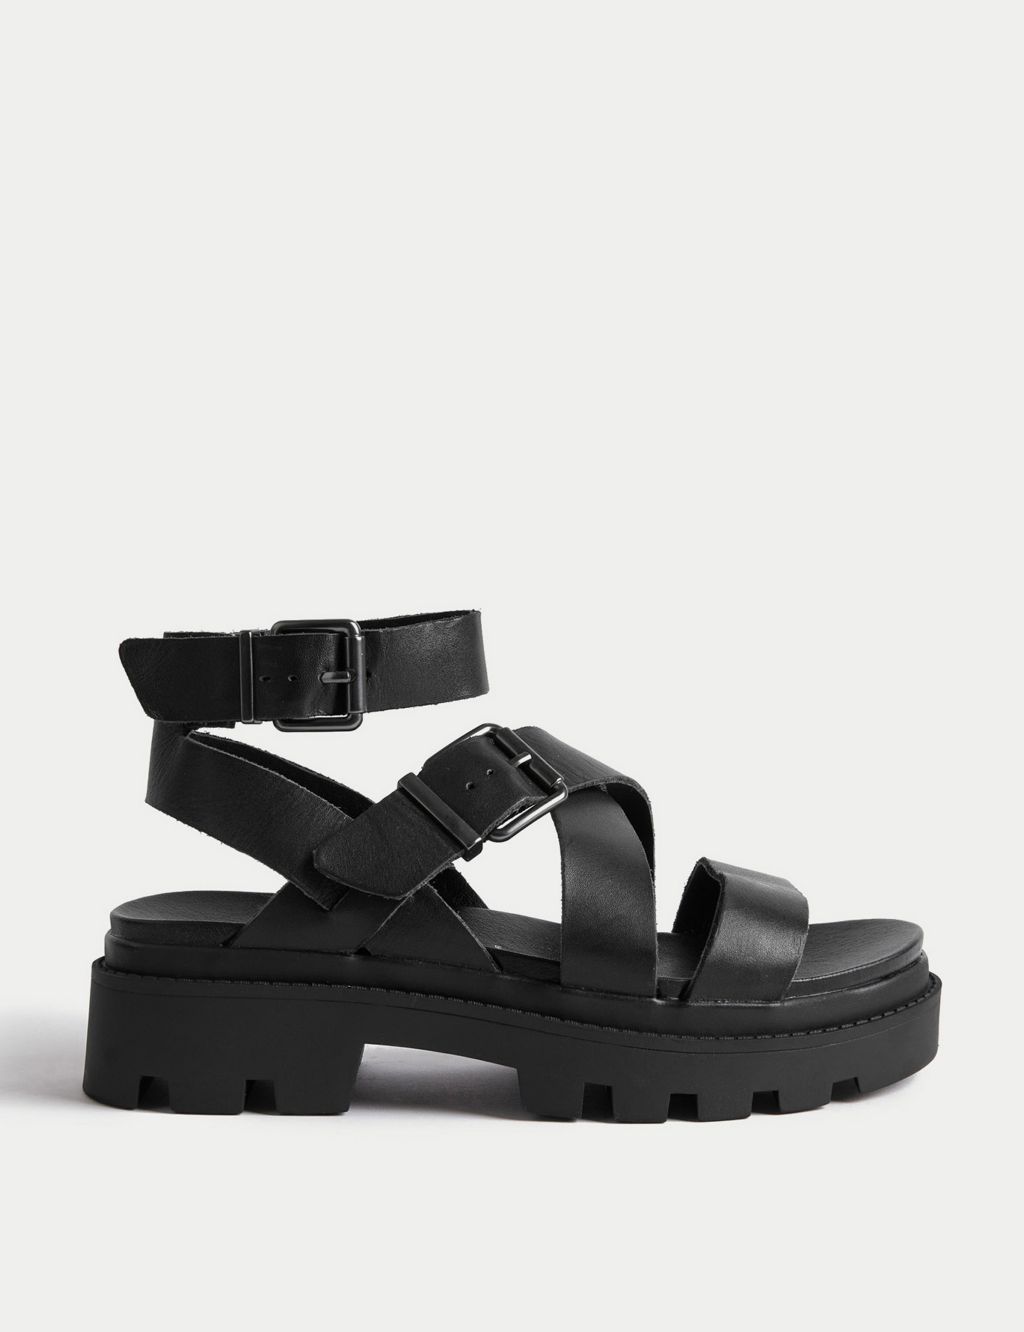 Wide Fit Leather Buckle Ankle Strap Sandals image 1